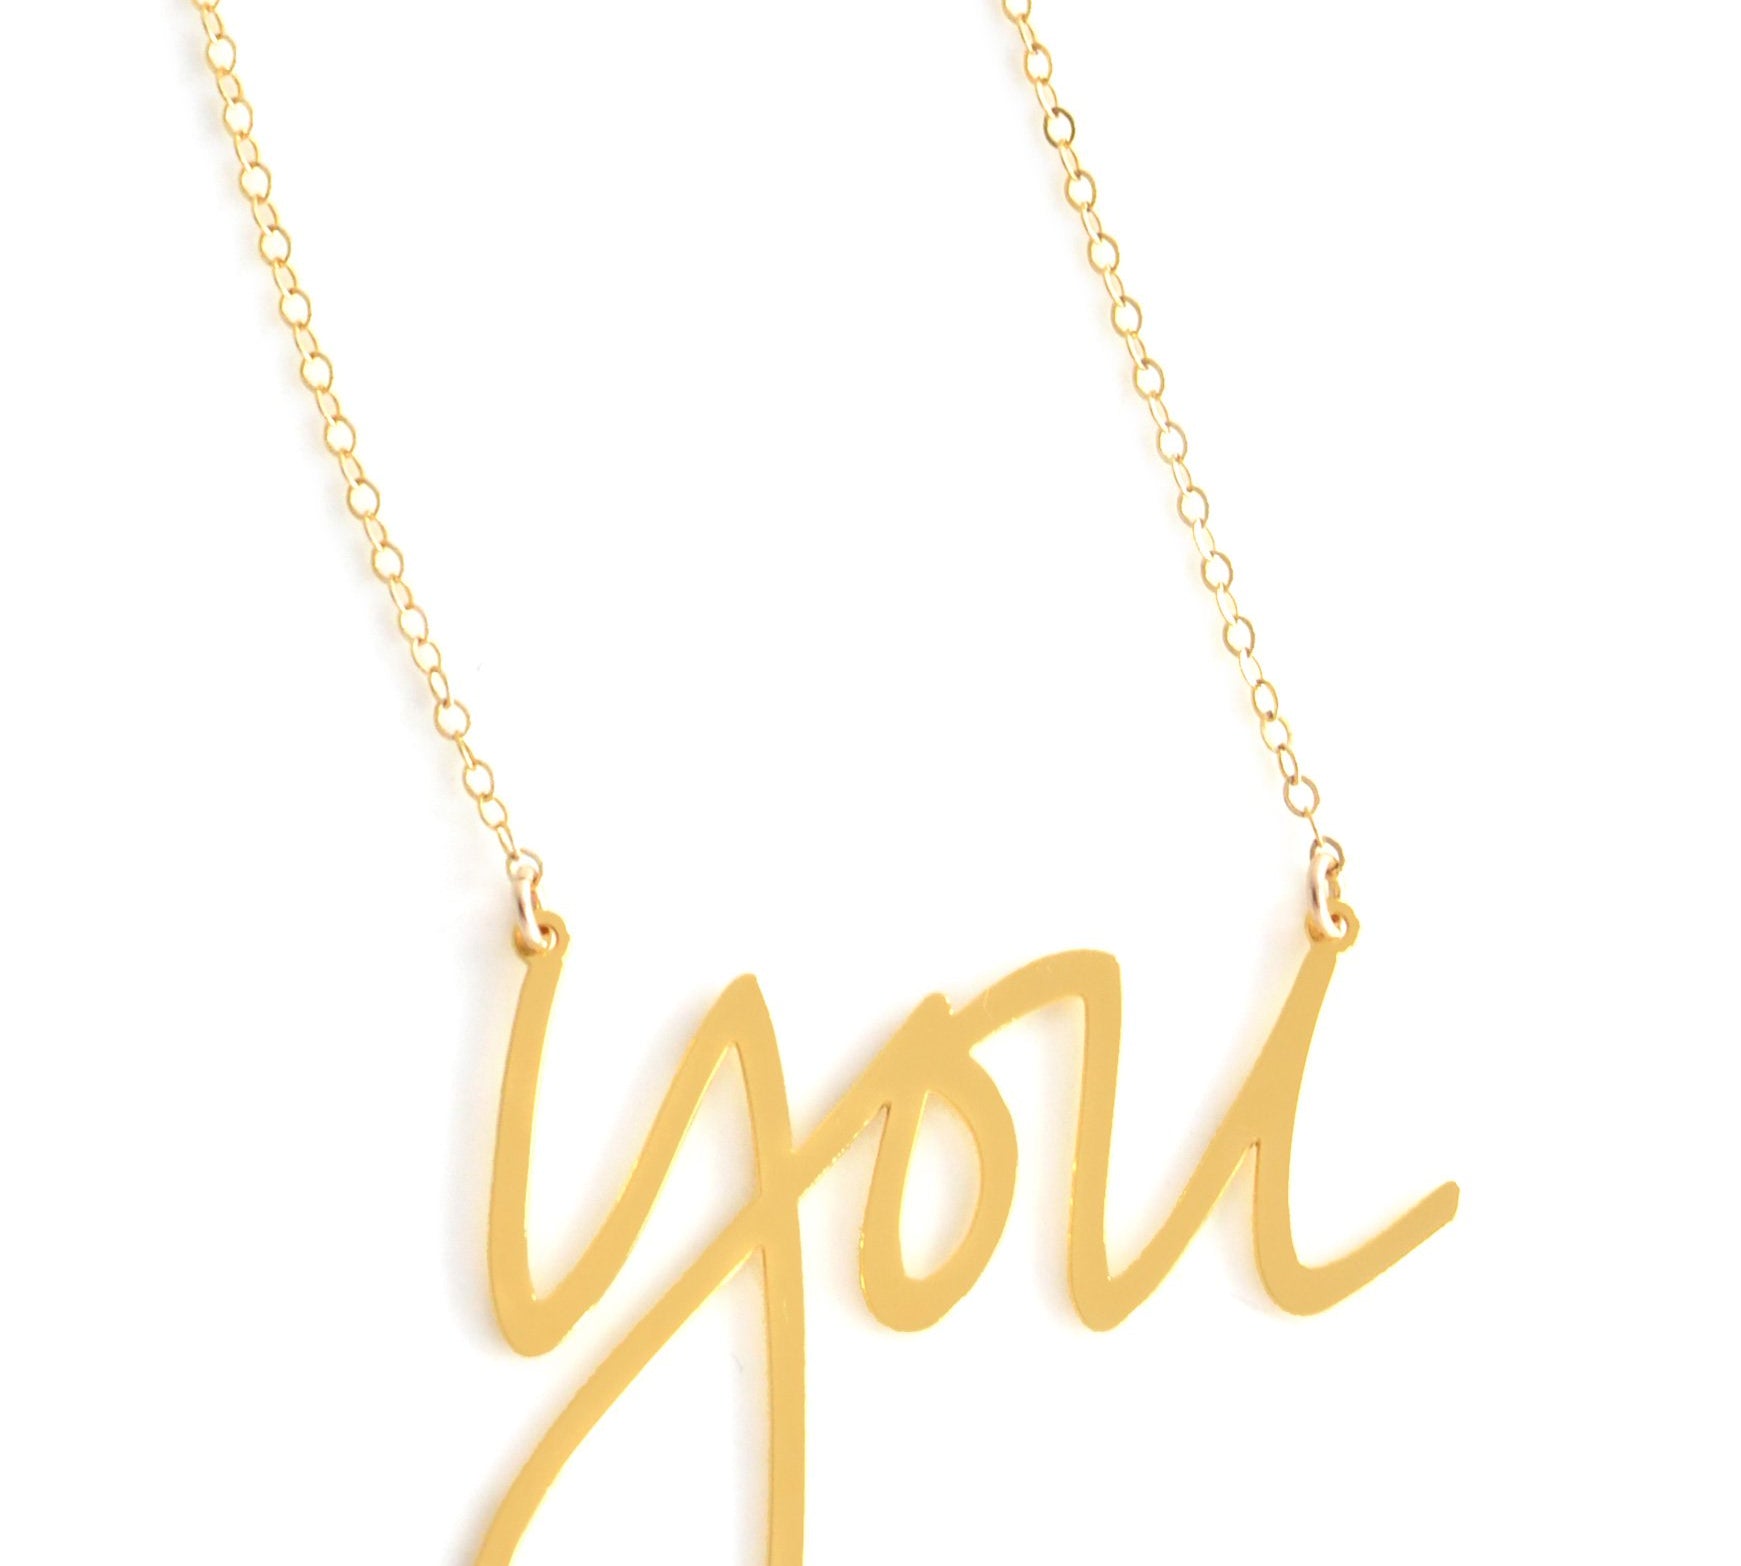 You Necklace - High Quality, Affordable, Hand Written, Self Love, Mantra Word Necklace - Available in Gold and Silver - Small and Large Sizes - Made in USA - Brevity Jewelry